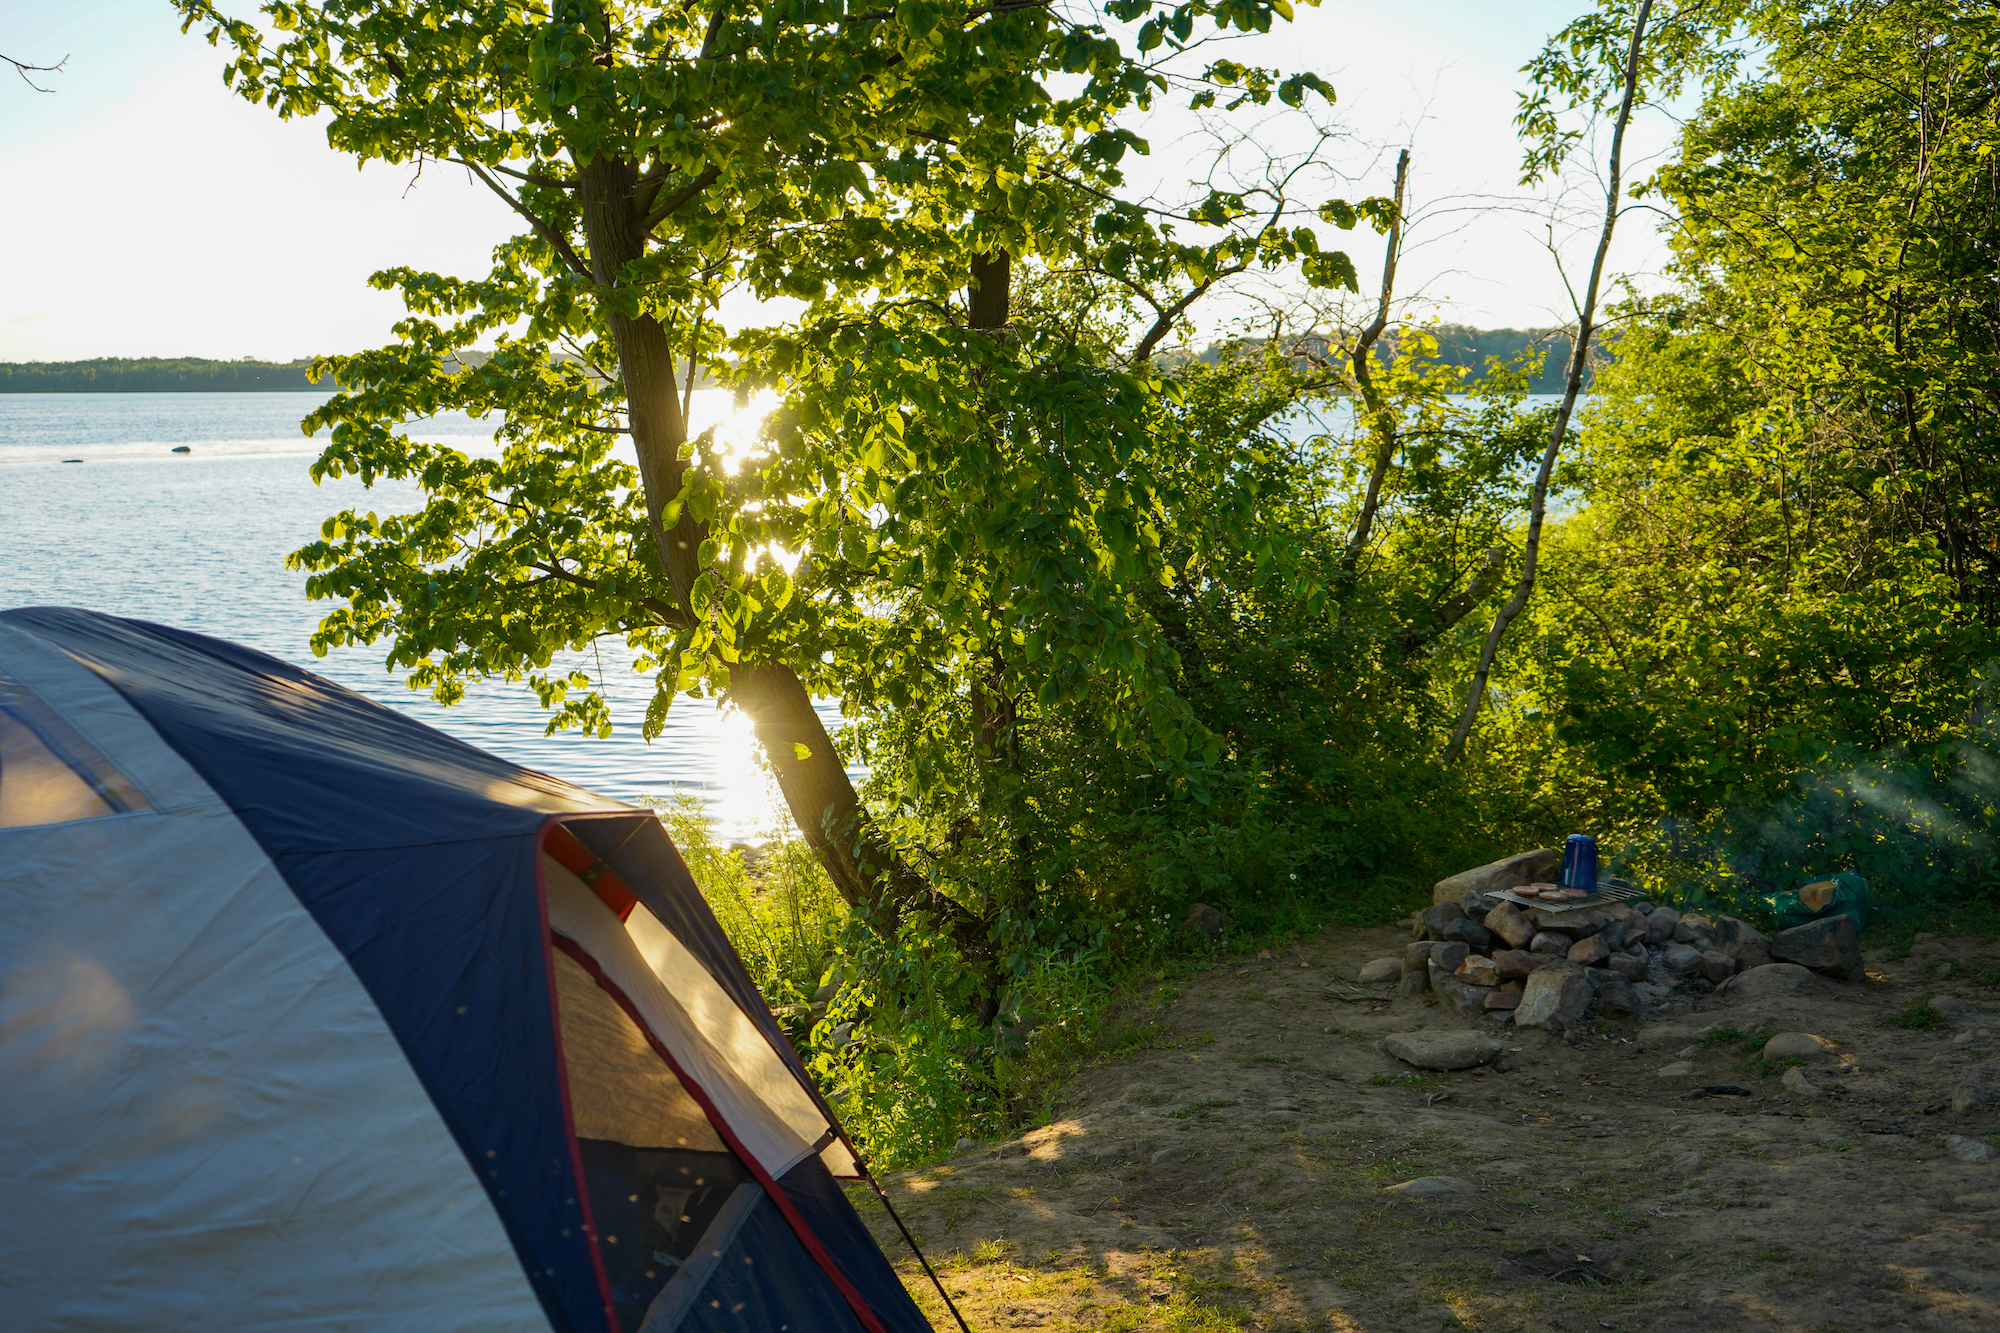 Campsite waterfront view during golden hour.